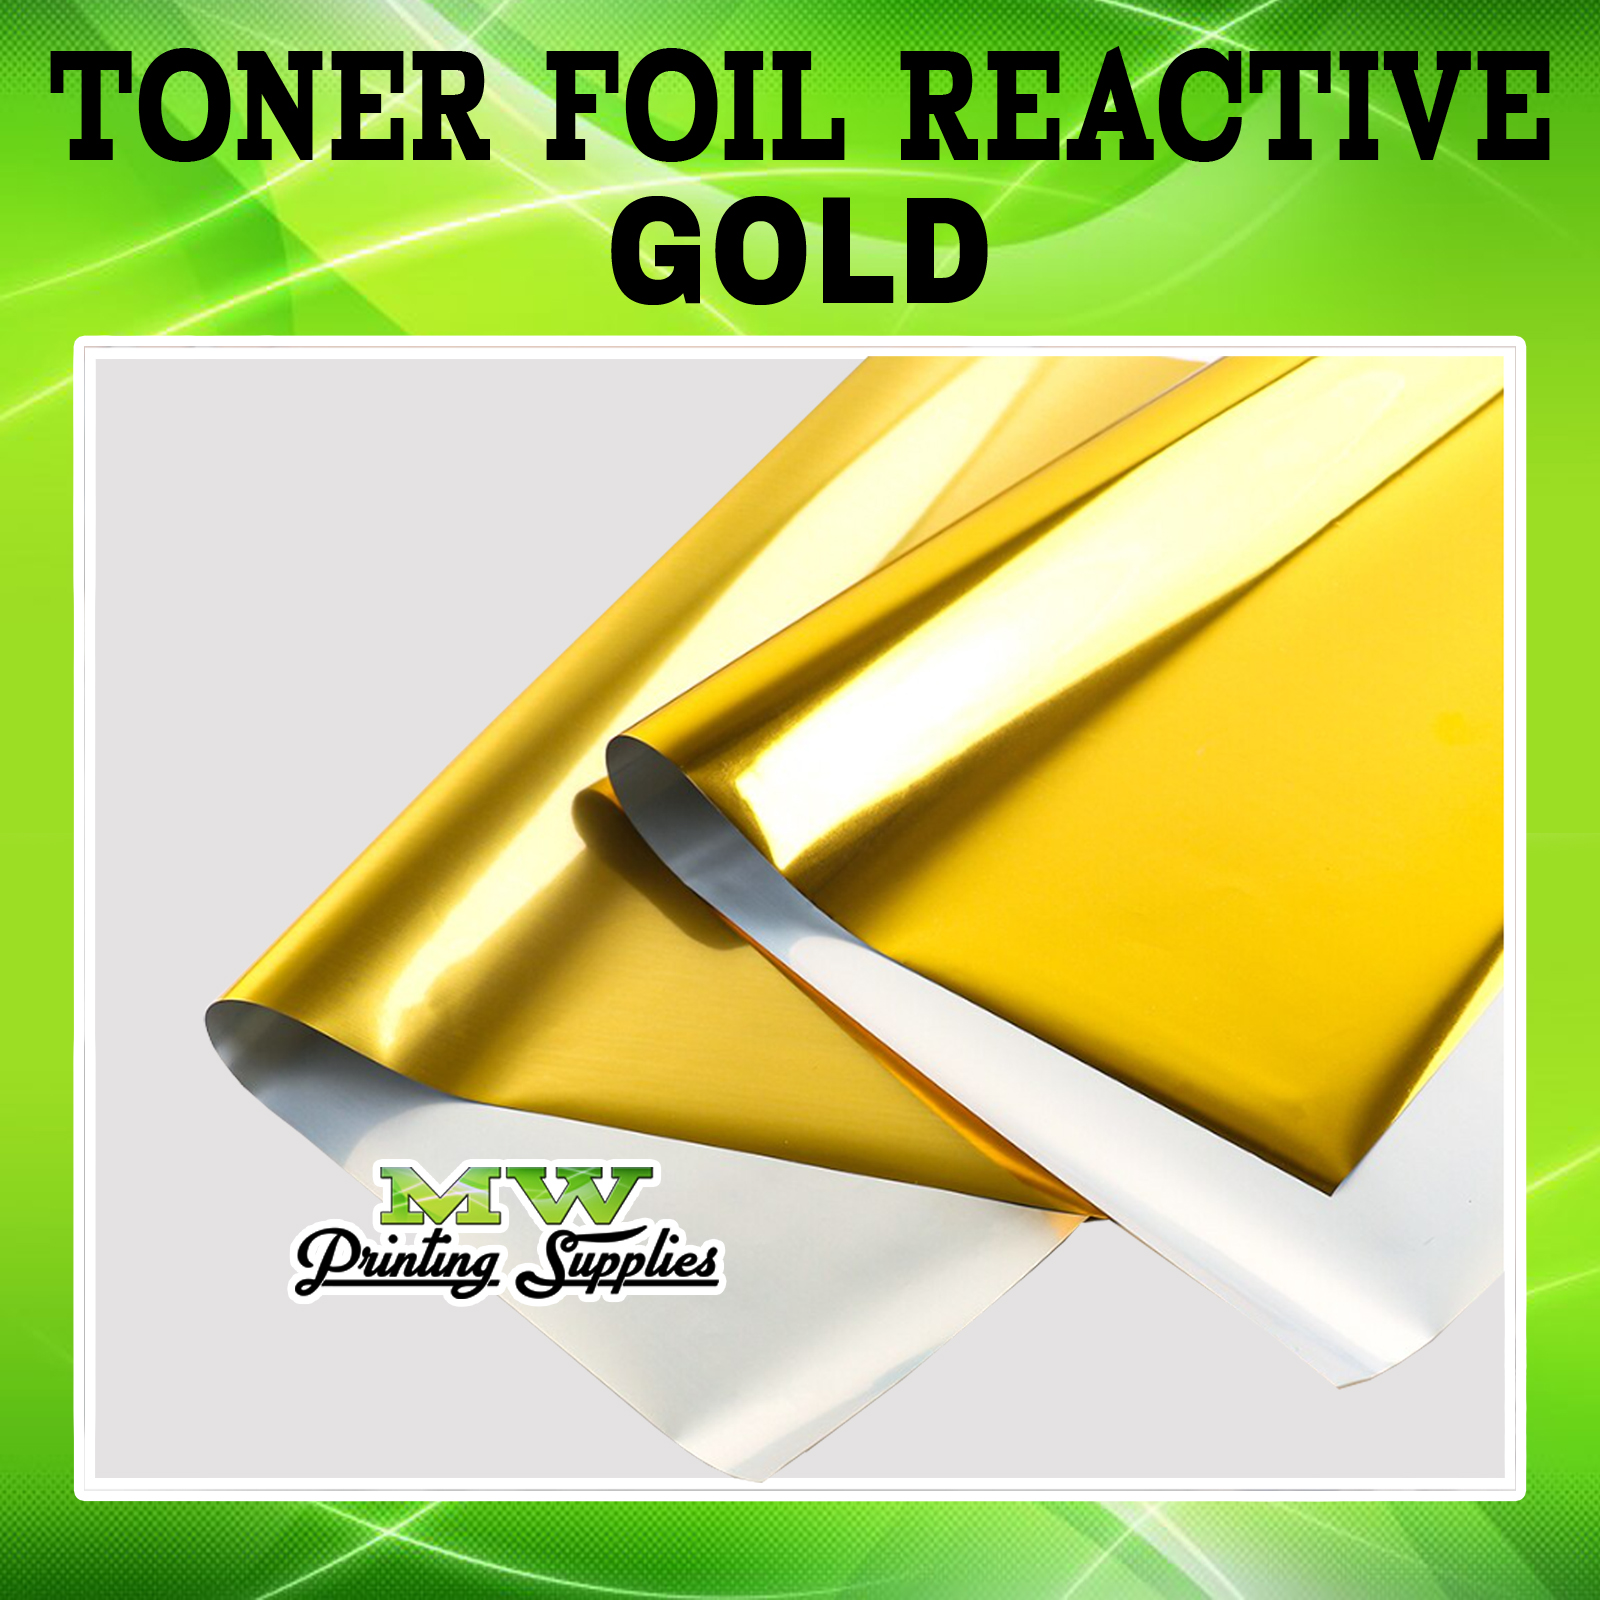 Gold Toner Reactive Foil for Invitation / Hot Foil for Stamping / Laser  Foil Transfer for invitation, product label, scrapbooking, gift card, arts  nd craft, MW Printing Supplies